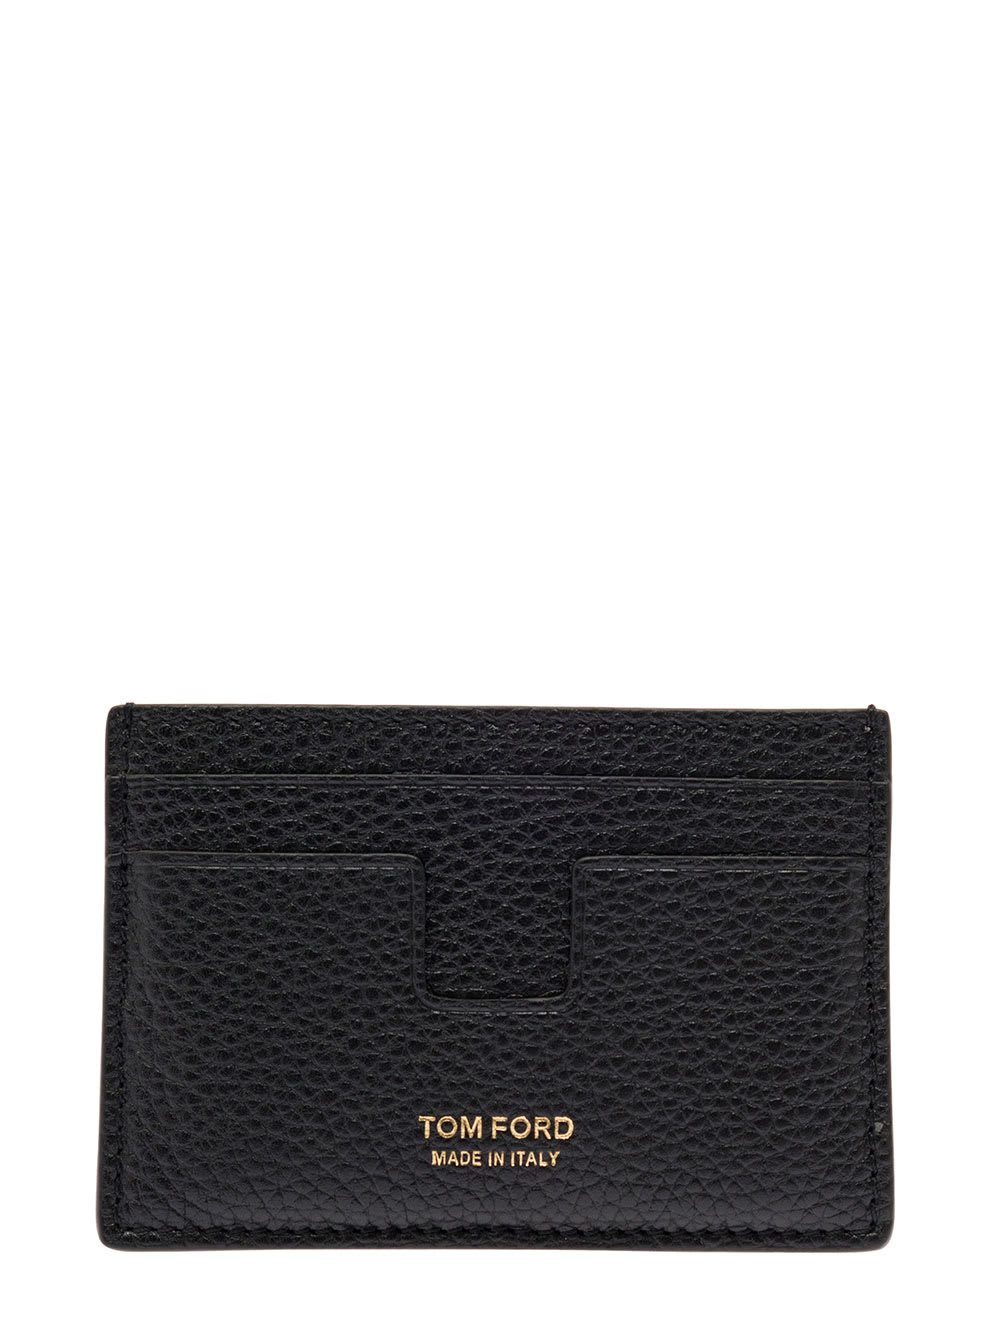 TOM FORD BLACK T LINE CARD-HOLDER WITH GOLD-colourED EMBOSSED LOGO IN GRAINY LEATHER MAN